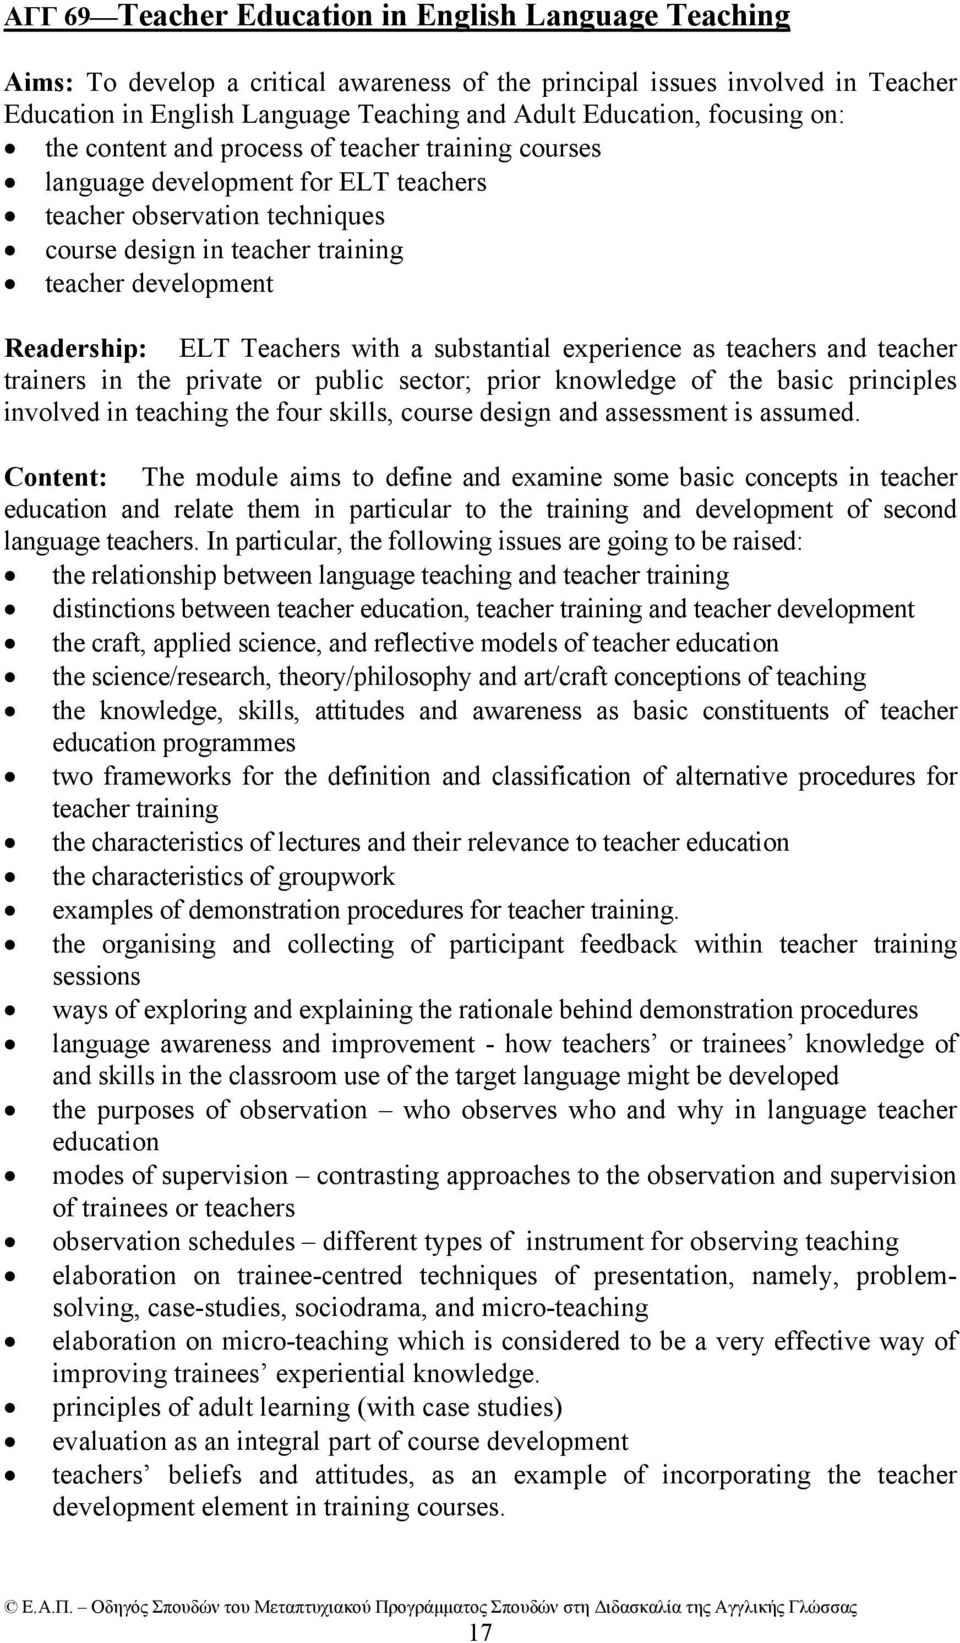 ELT Teachers with a substantial experience as teachers and teacher trainers in the private or public sector; prior knowledge of the basic principles involved in teaching the four skills, course